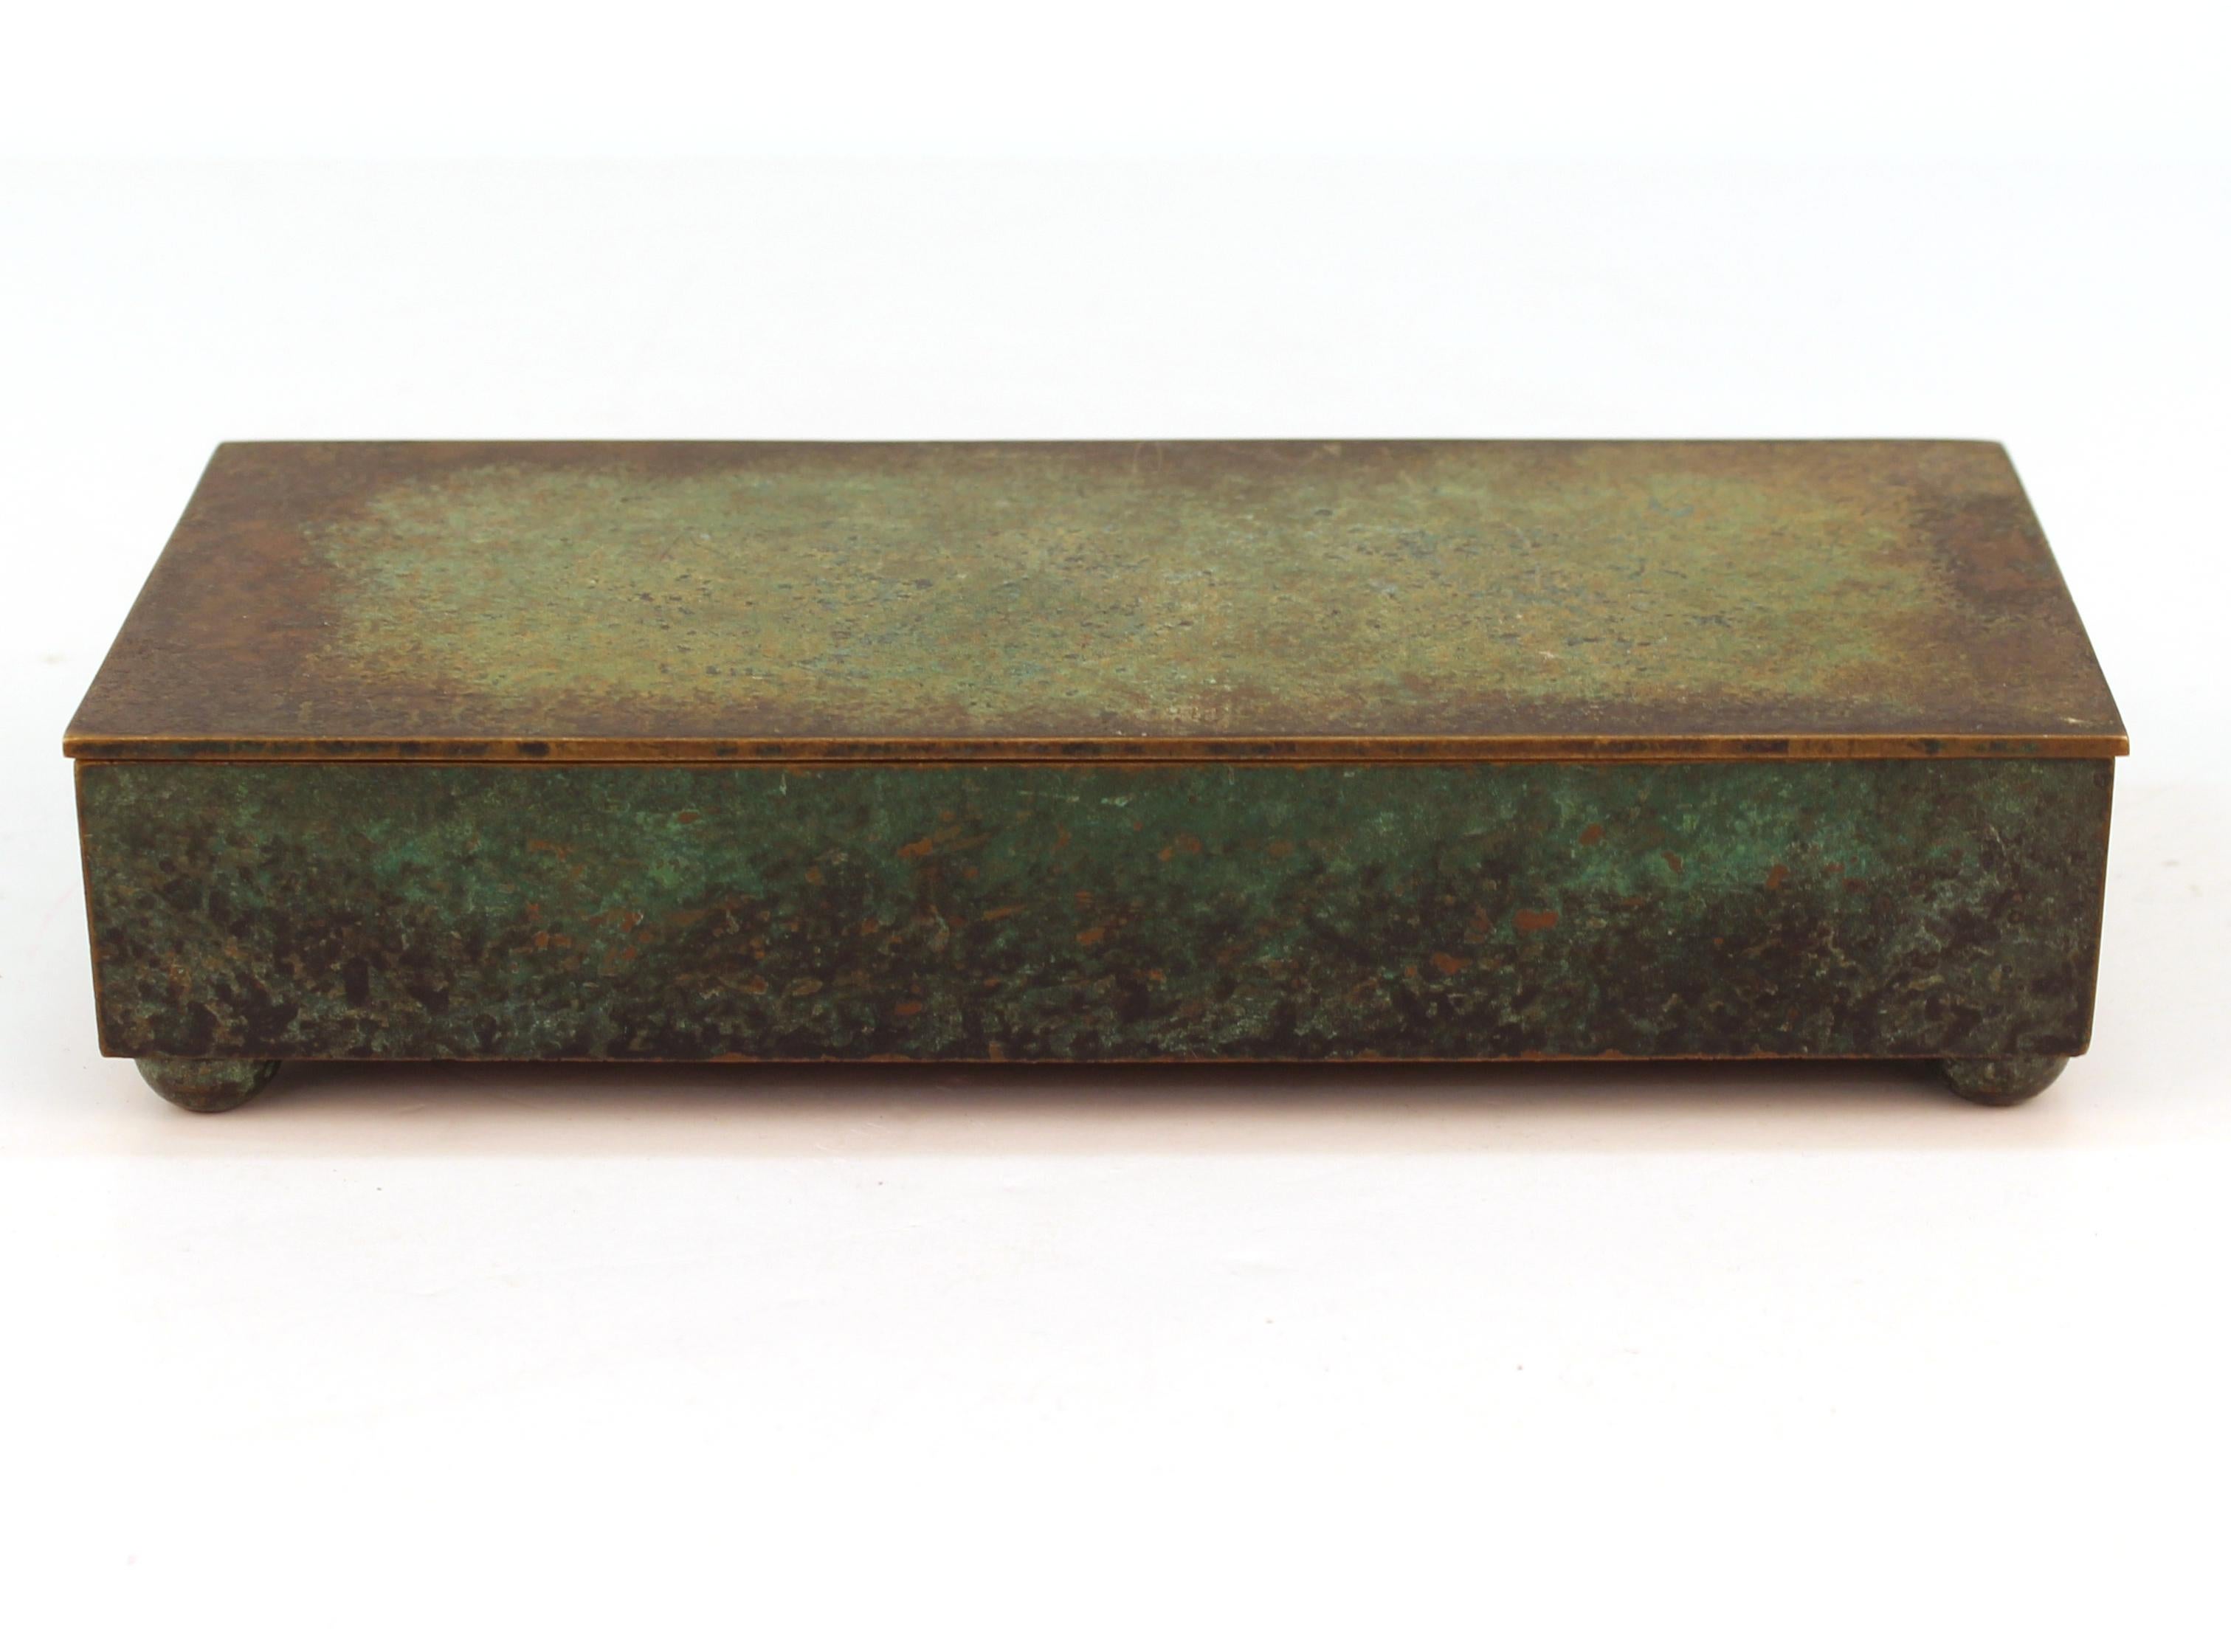 Carl Sorensen Arts & Crafts or early Art Deco verdigris green patinated bronze box with cedar lined interior. Bottom stamped with designers signature.